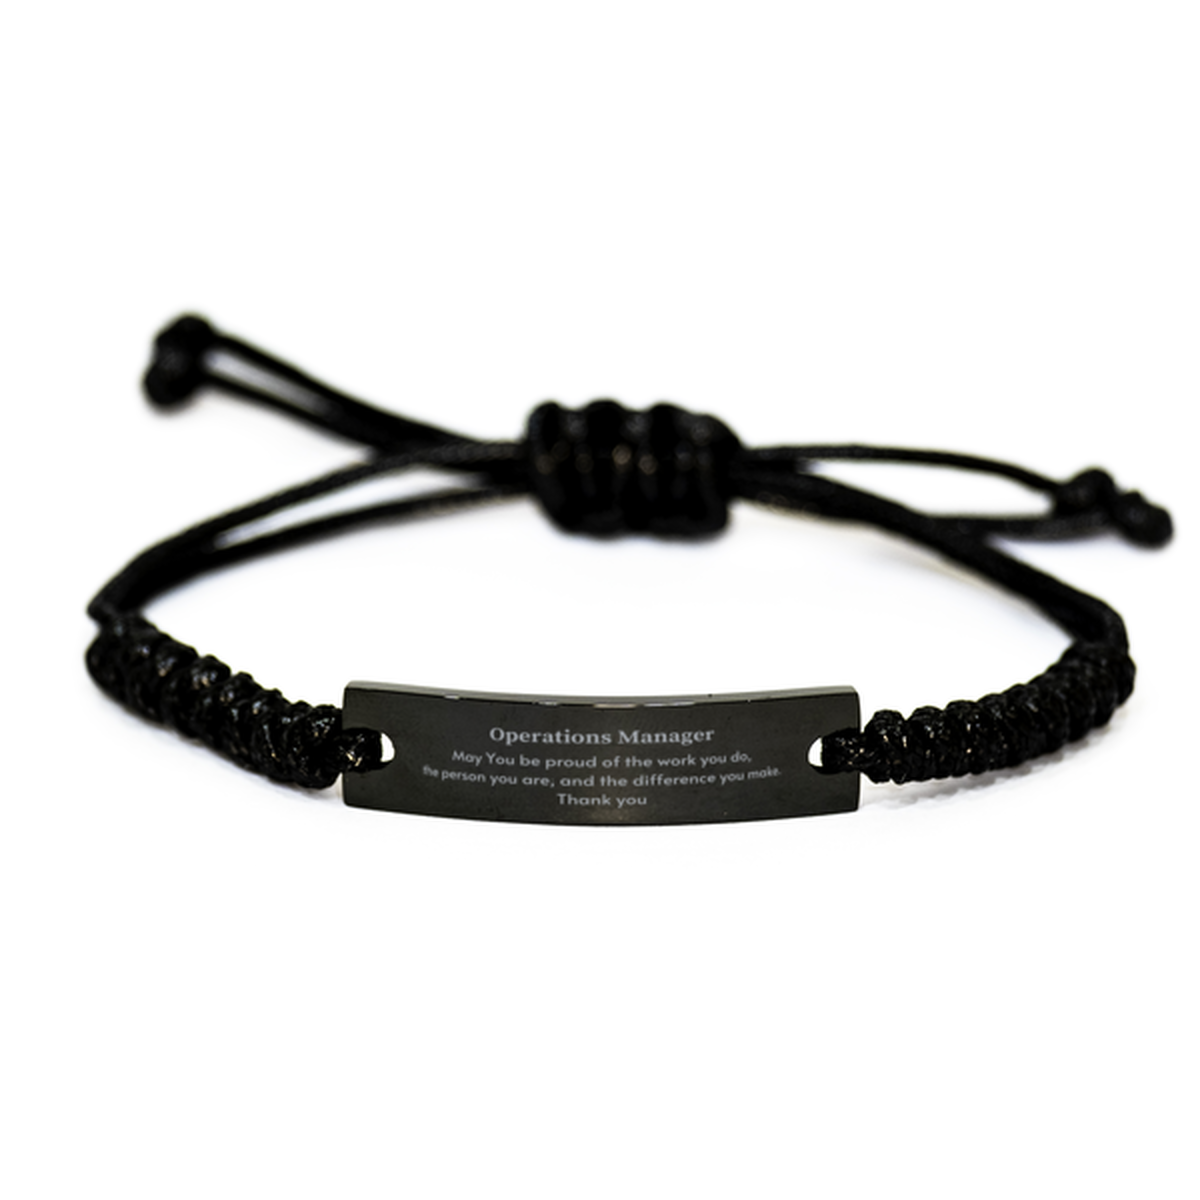 Heartwarming Black Rope Bracelet Retirement Coworkers Gifts for Operations Manager, Operations Manager May You be proud of the work you do, the person you are Gifts for Boss Men Women Friends